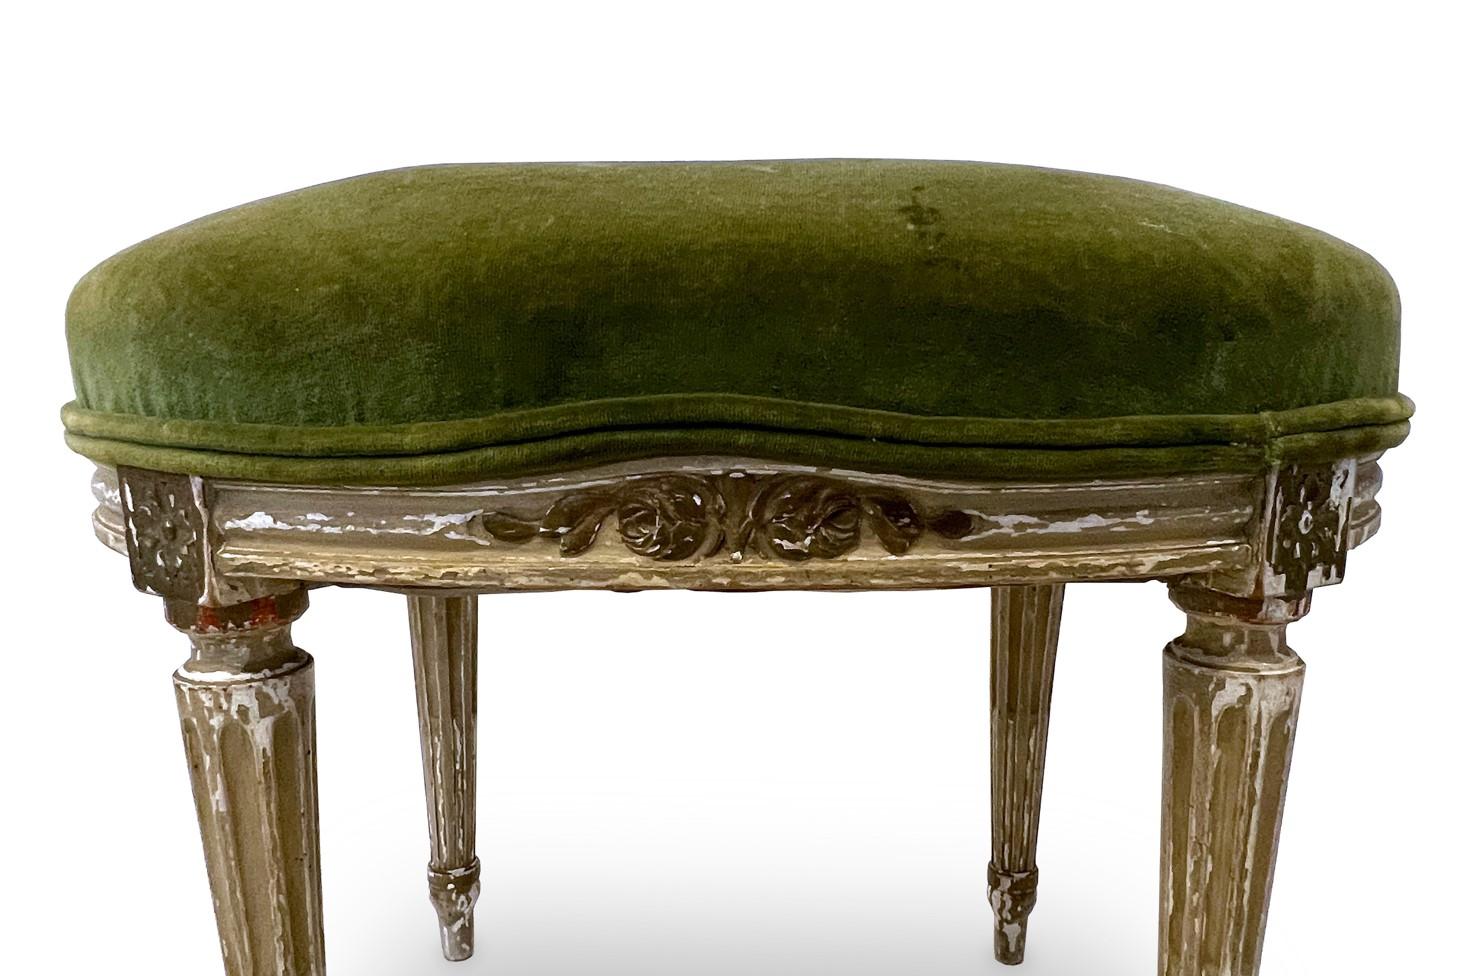 20th Century French Louis XVI Style Painted Stool with Olive Velvet Upholstery